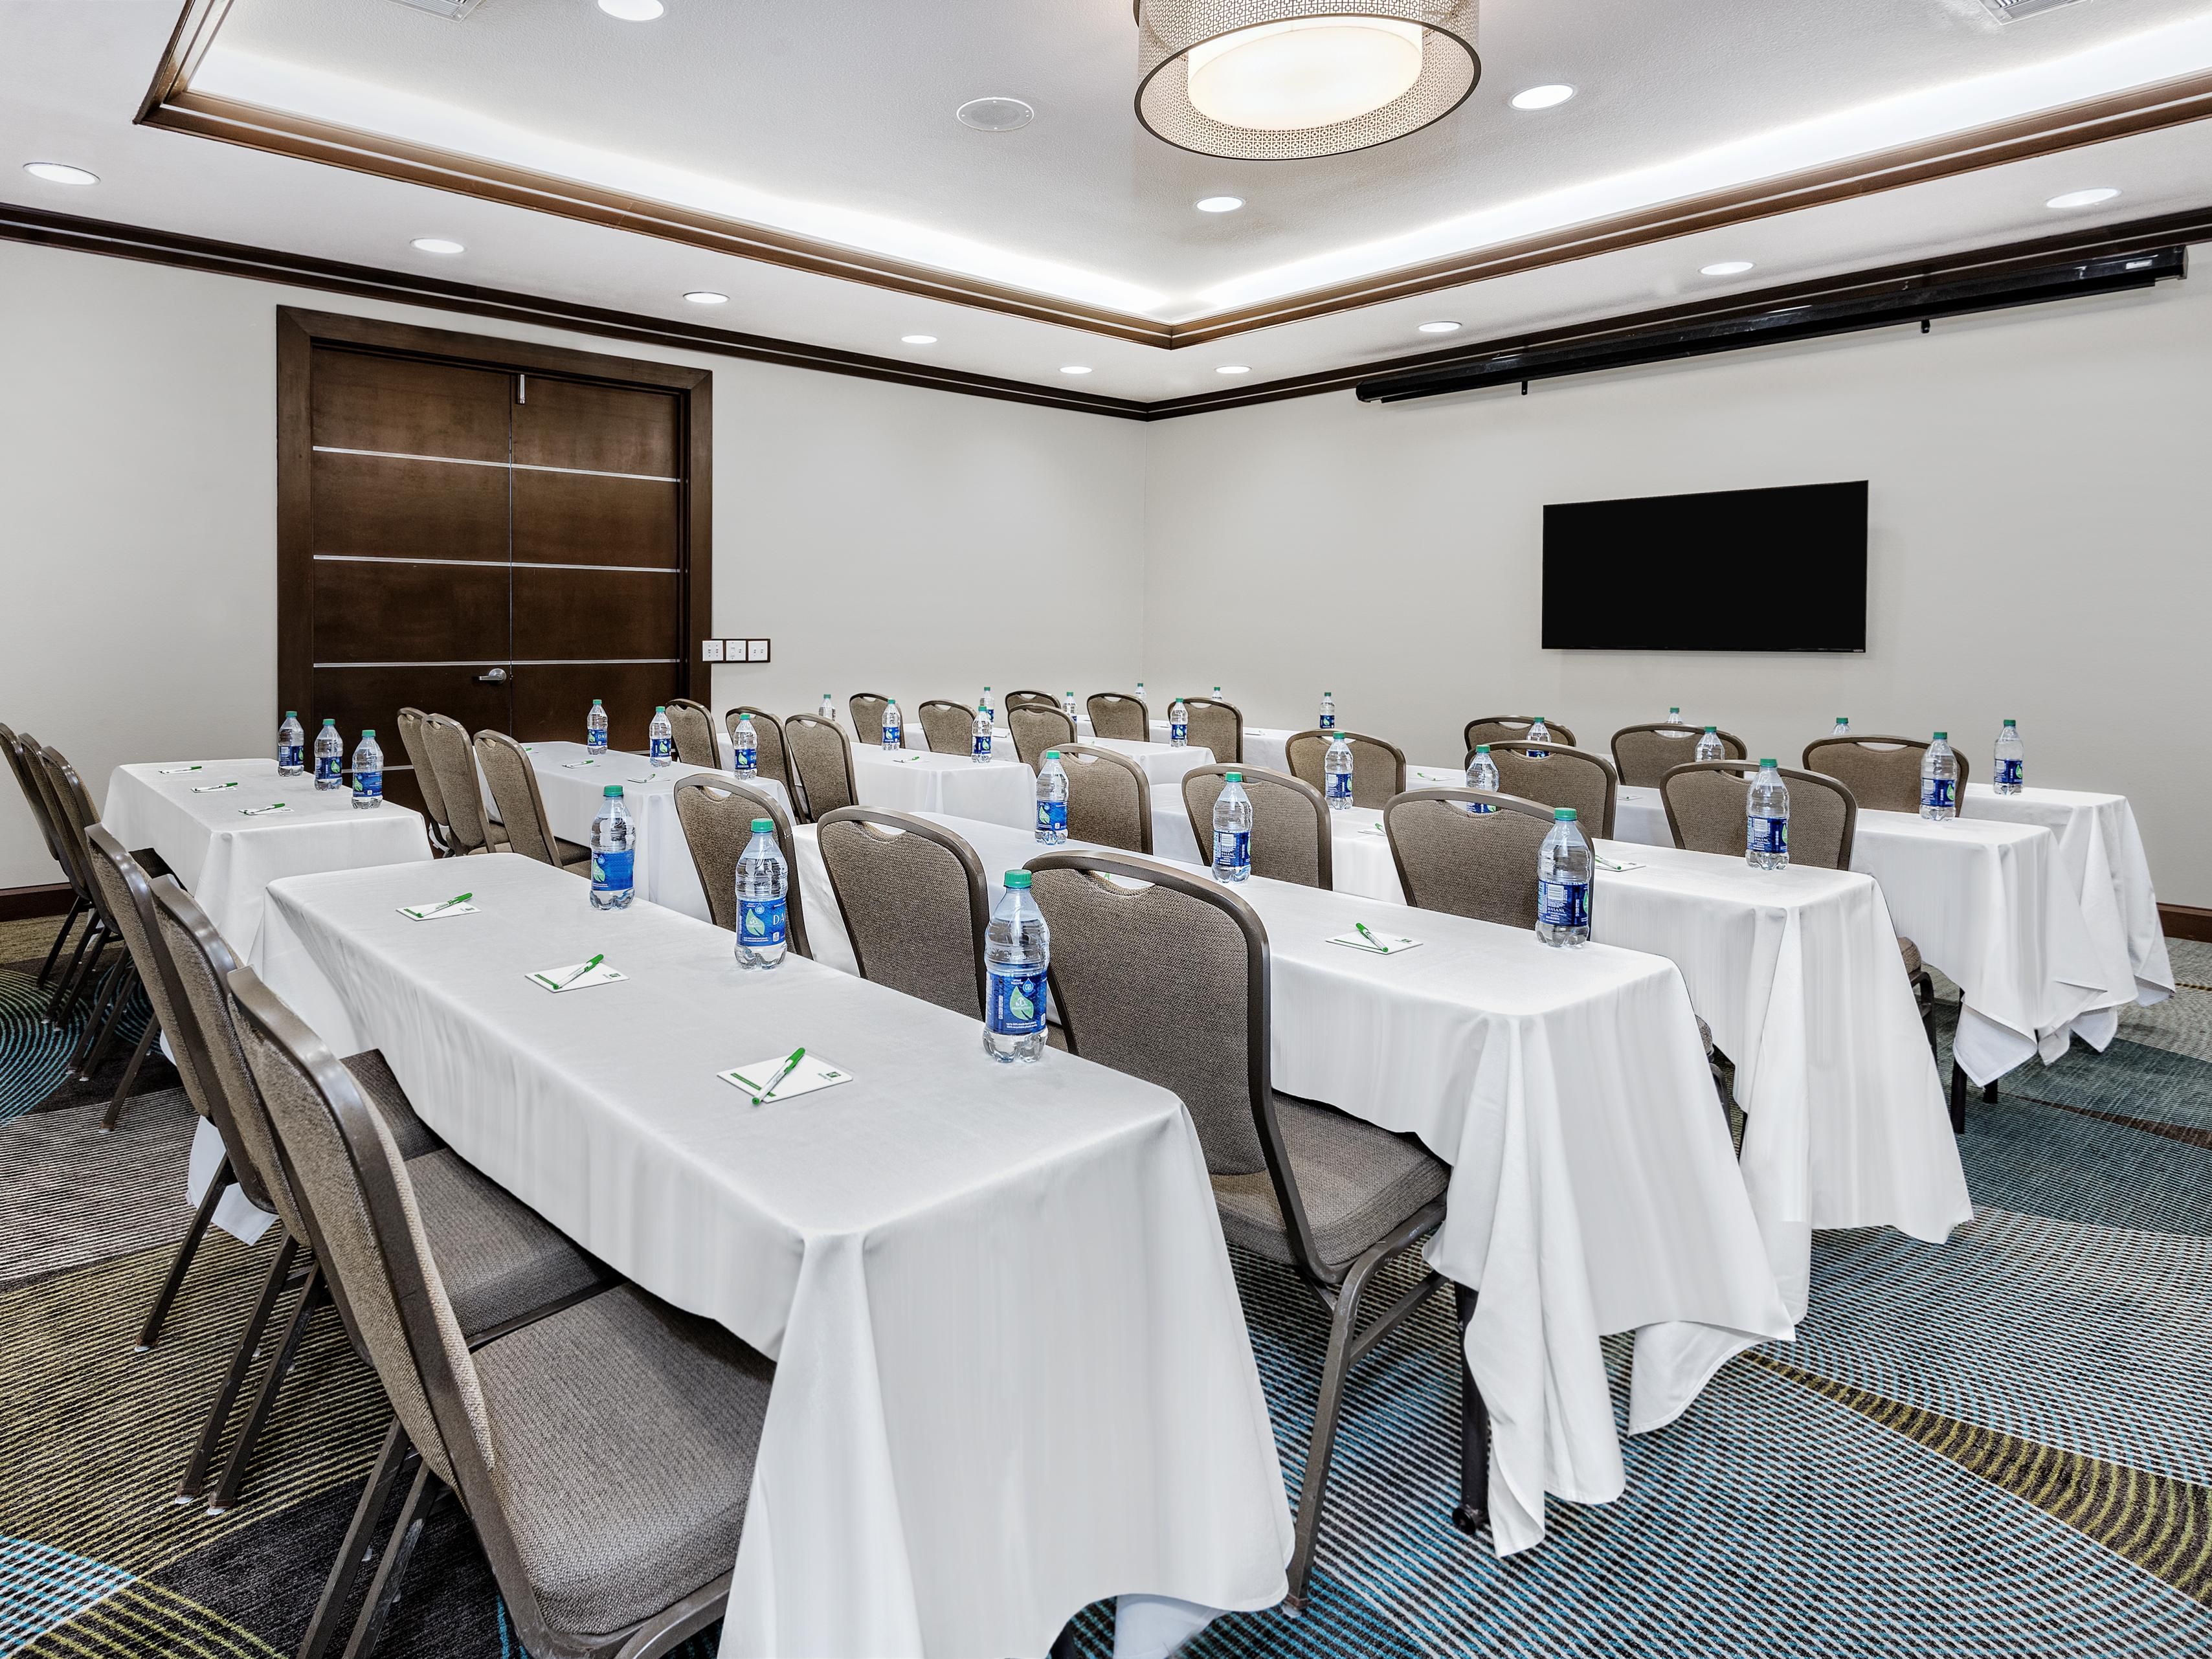 We offer 3,500 sq ft of flexible function space perfect for a conference or memorable celebration. Our friendly and knowledgeable sales team will be delighted to assist you! Ask us about IHG Business Rewards and save while you host your event.